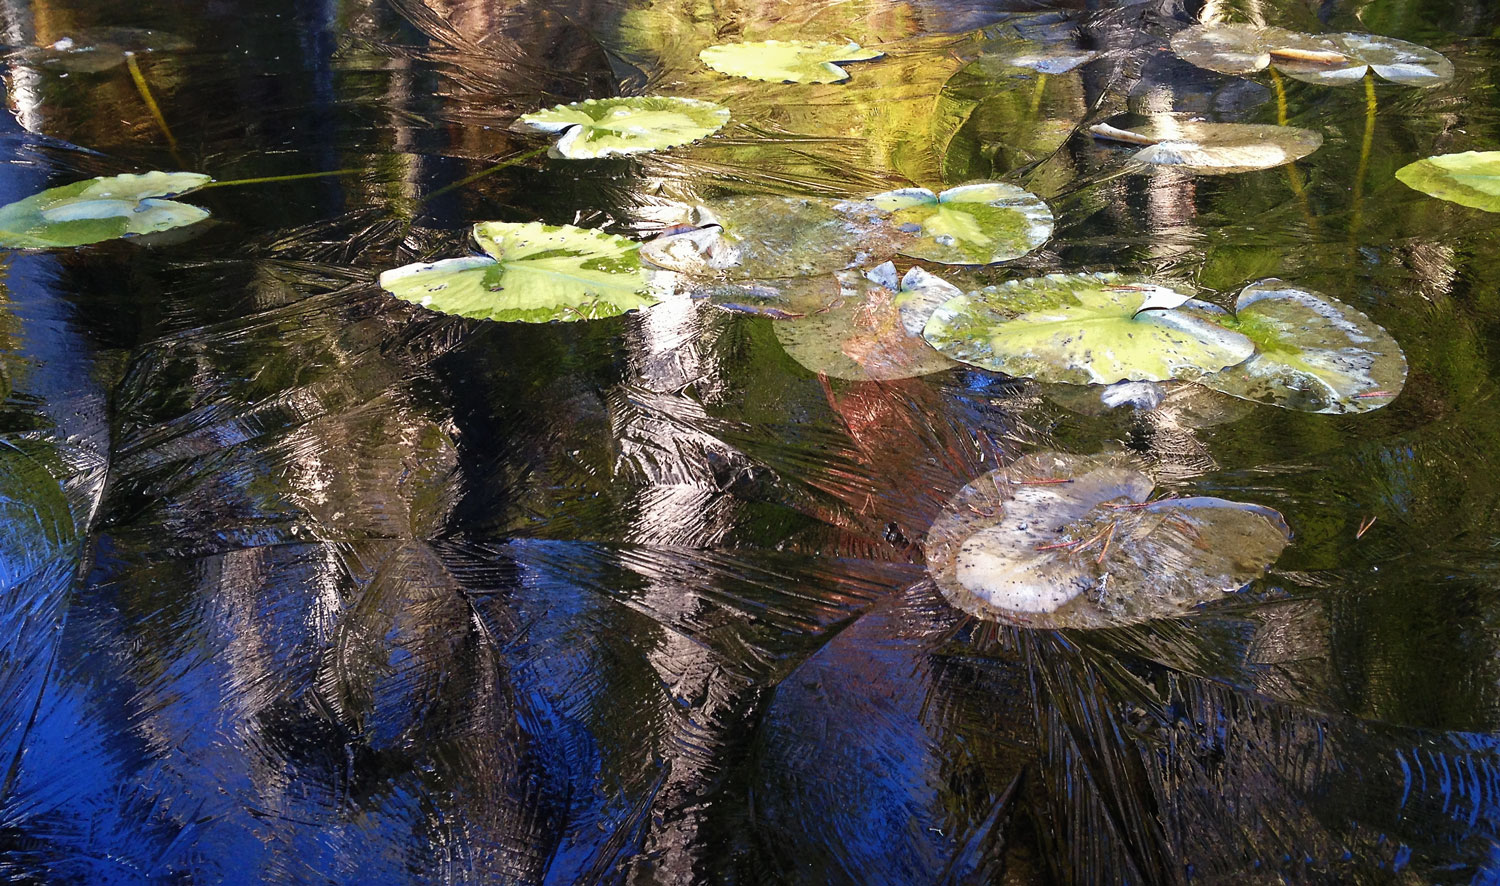 Lily pads in ice